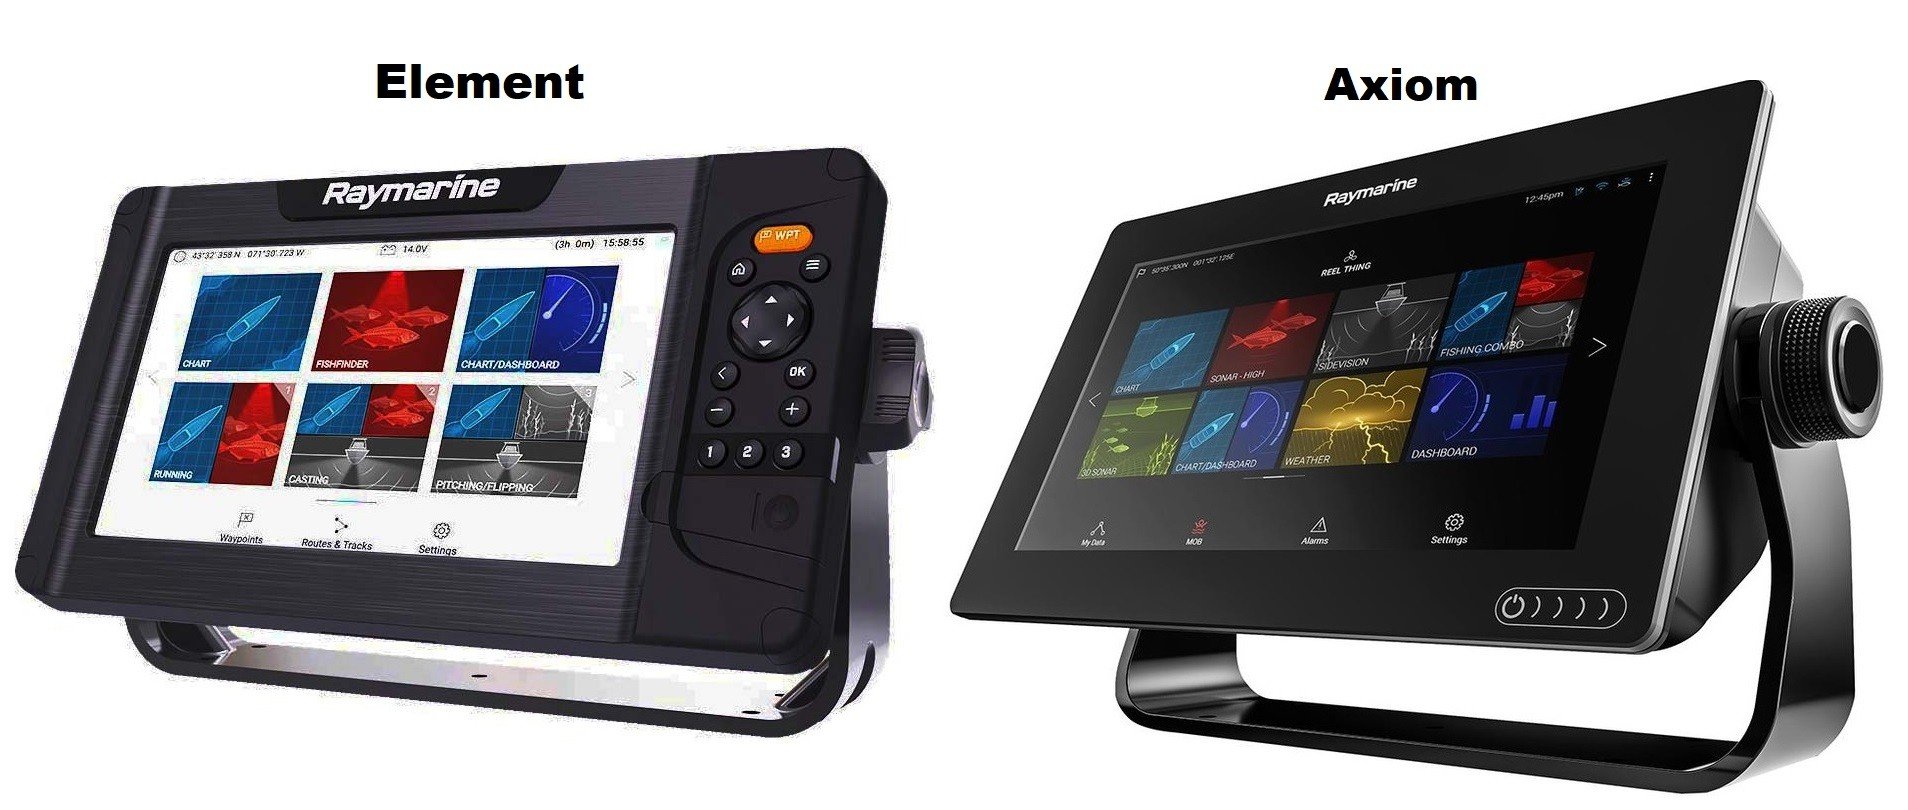 Differences between Raymarine Element and Axiom